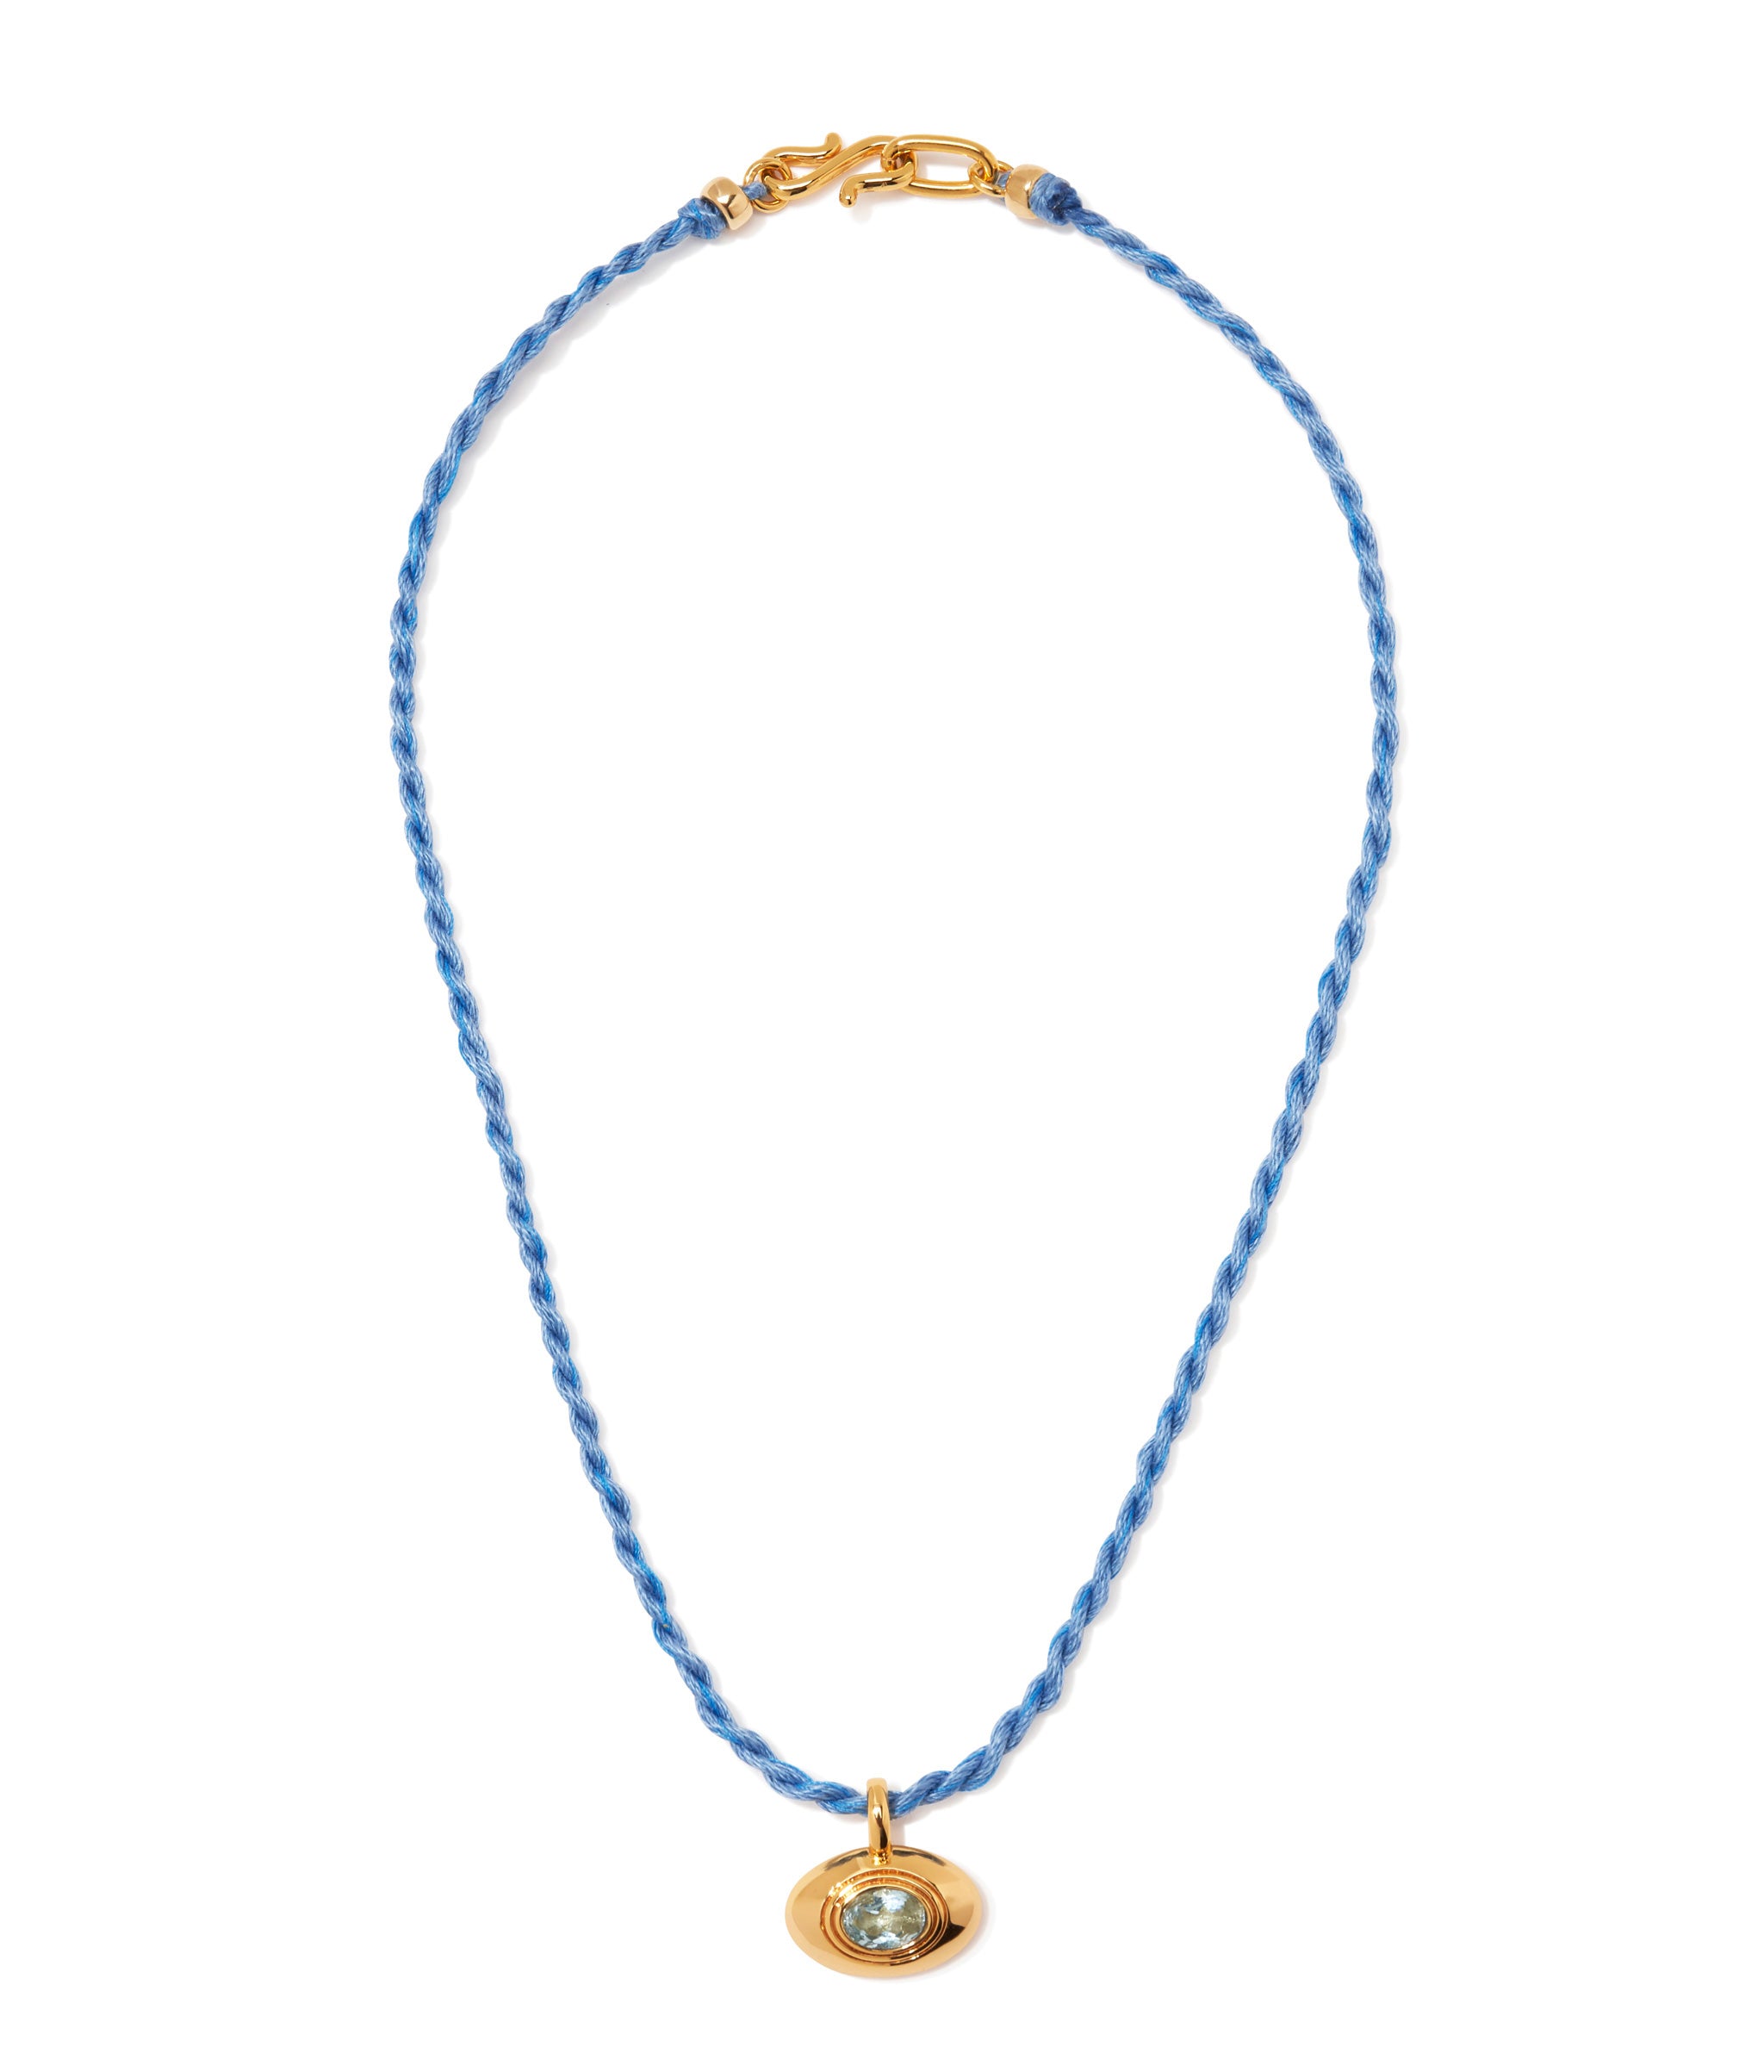 Best Friend Necklace in Lemonade. Hand-twisted yellow cord necklace, gold-plated oval pendent with blue topaz.